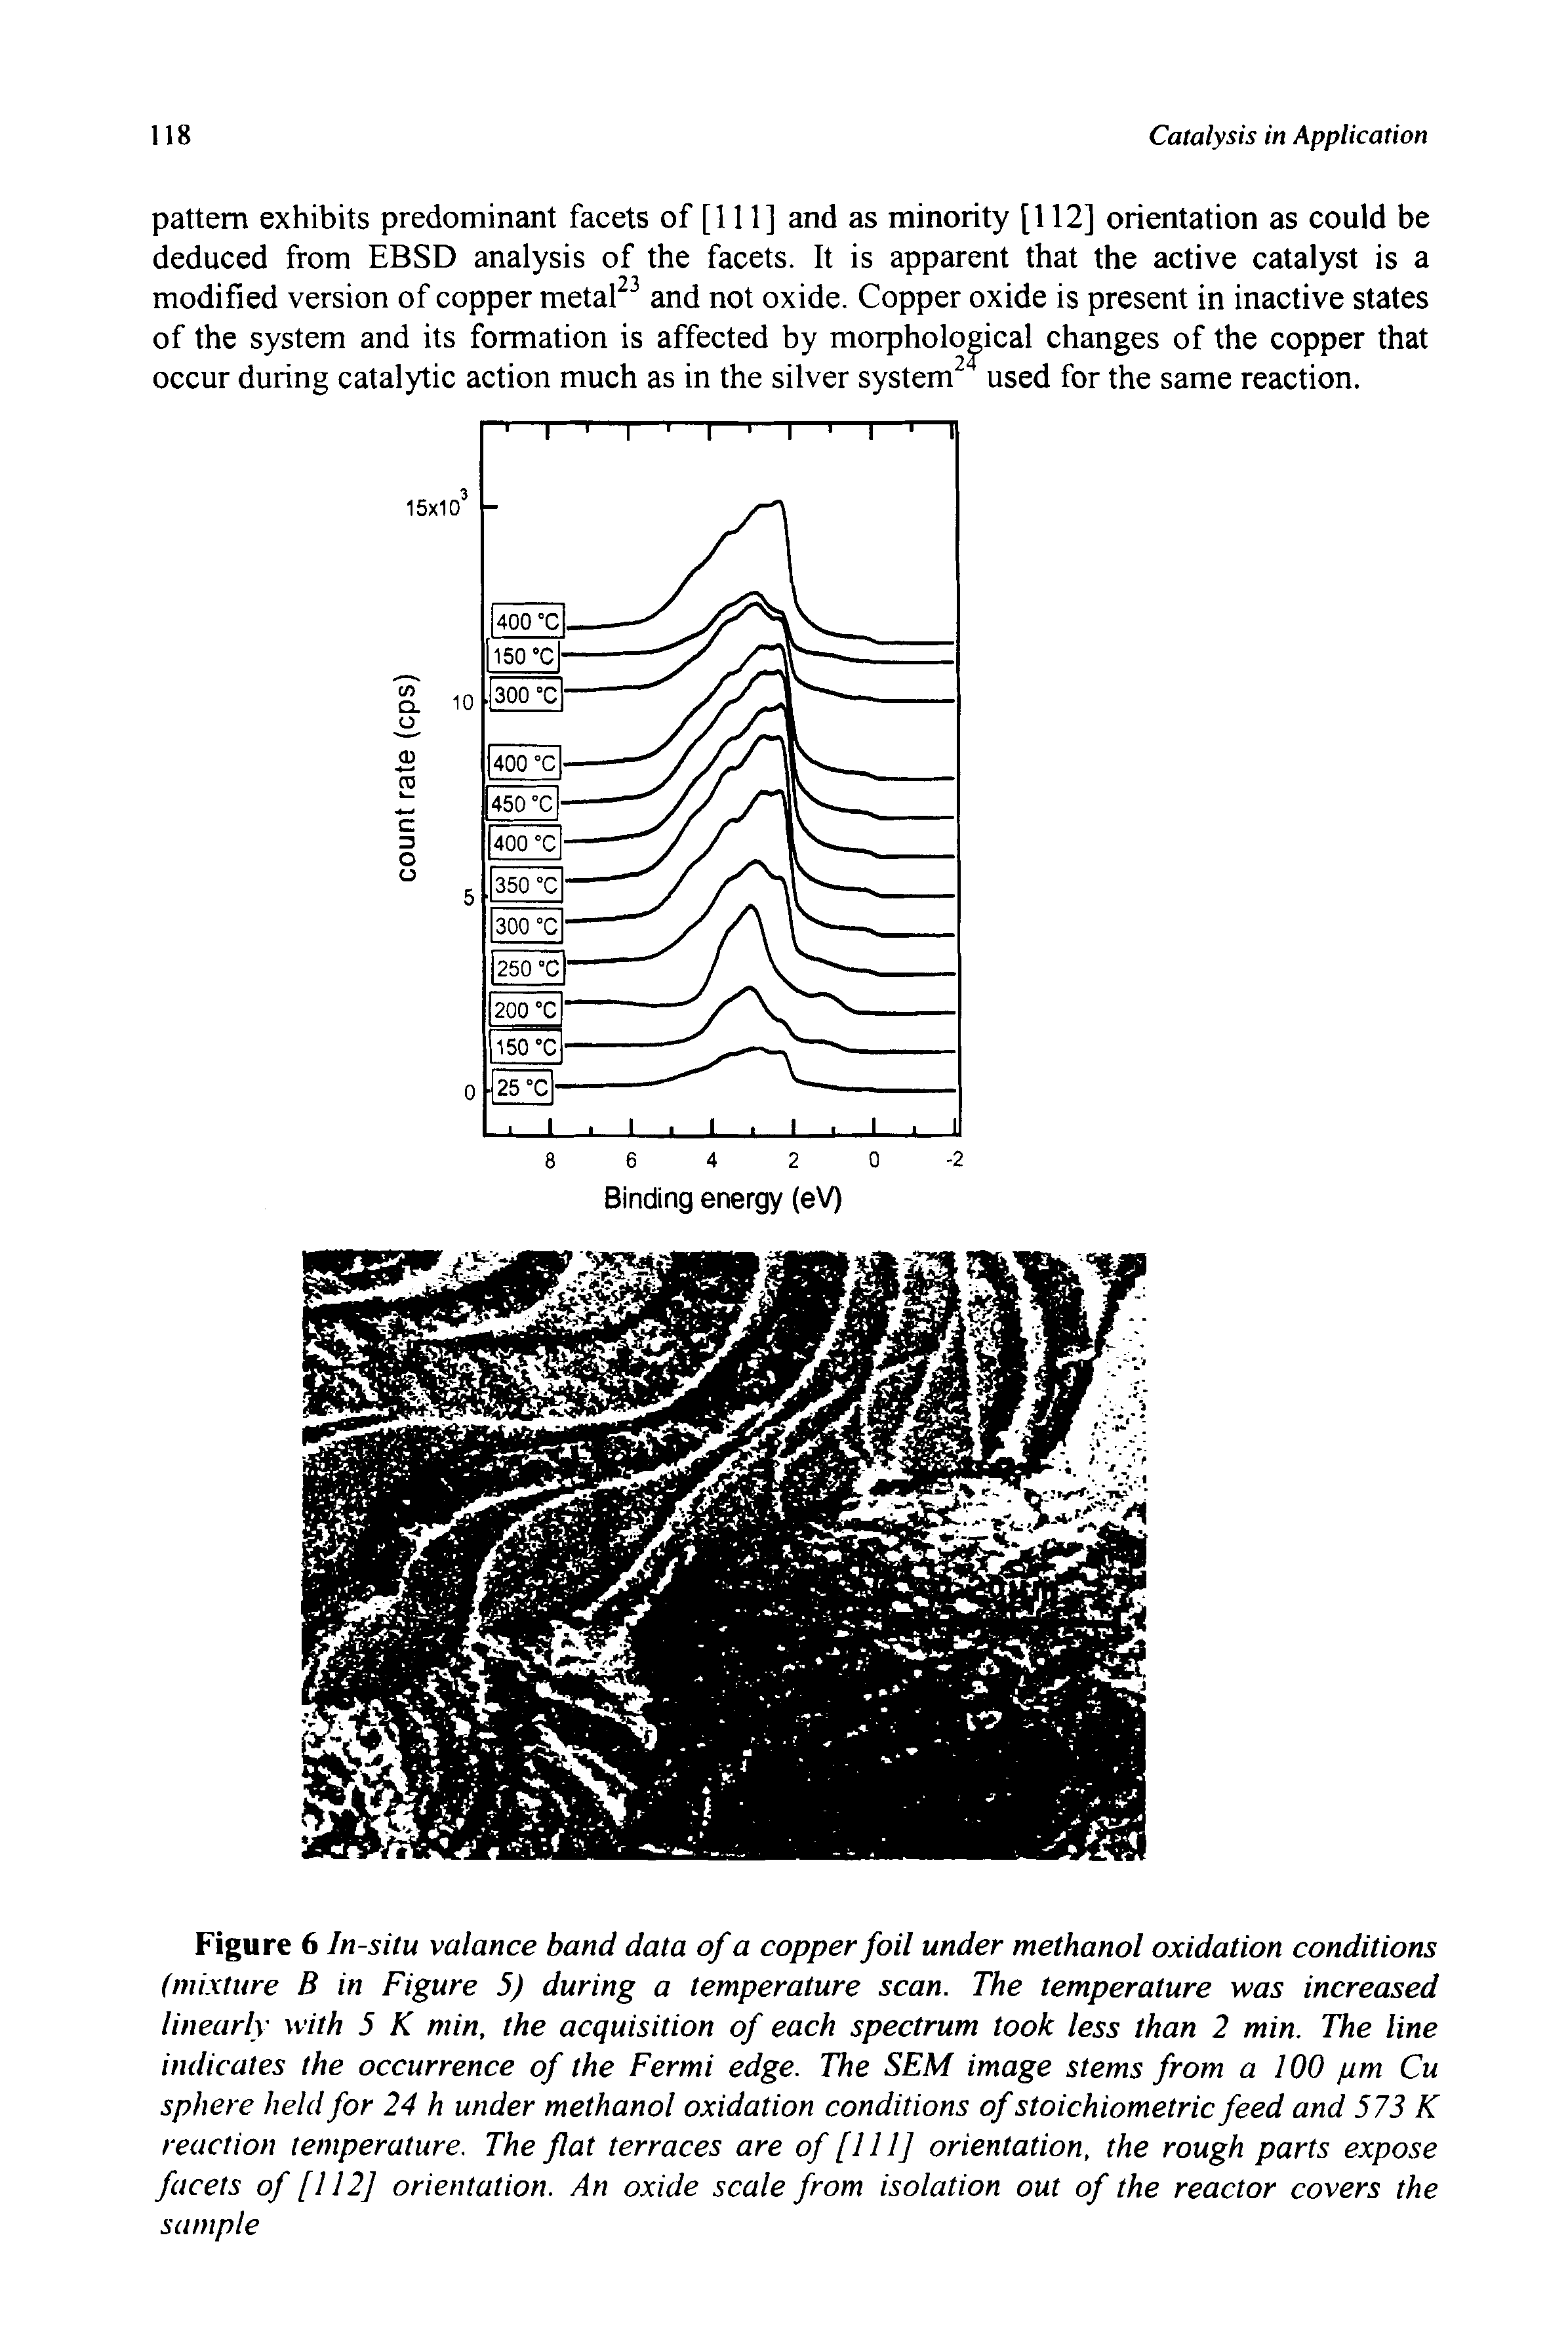 Figure 6 In-situ valance band data of a copper foil under methanol oxidation conditions (mixture B in Figure 5) during a temperature scan. The temperature was increased linearly with 5 K min, the acquisition of each spectrum took less than 2 min. The line indicates the occurrence of the Fermi edge. The SEM image stems from a 100 pm Cu sphere held for 24 h under methanol oxidation conditions of stoichiometric feed and 572 K reaction temperature. The flat terraces are of [111] orientation, the rough parts expose facets of [112] orientation. An oxide scale from isolation out of the reactor covers the sample...